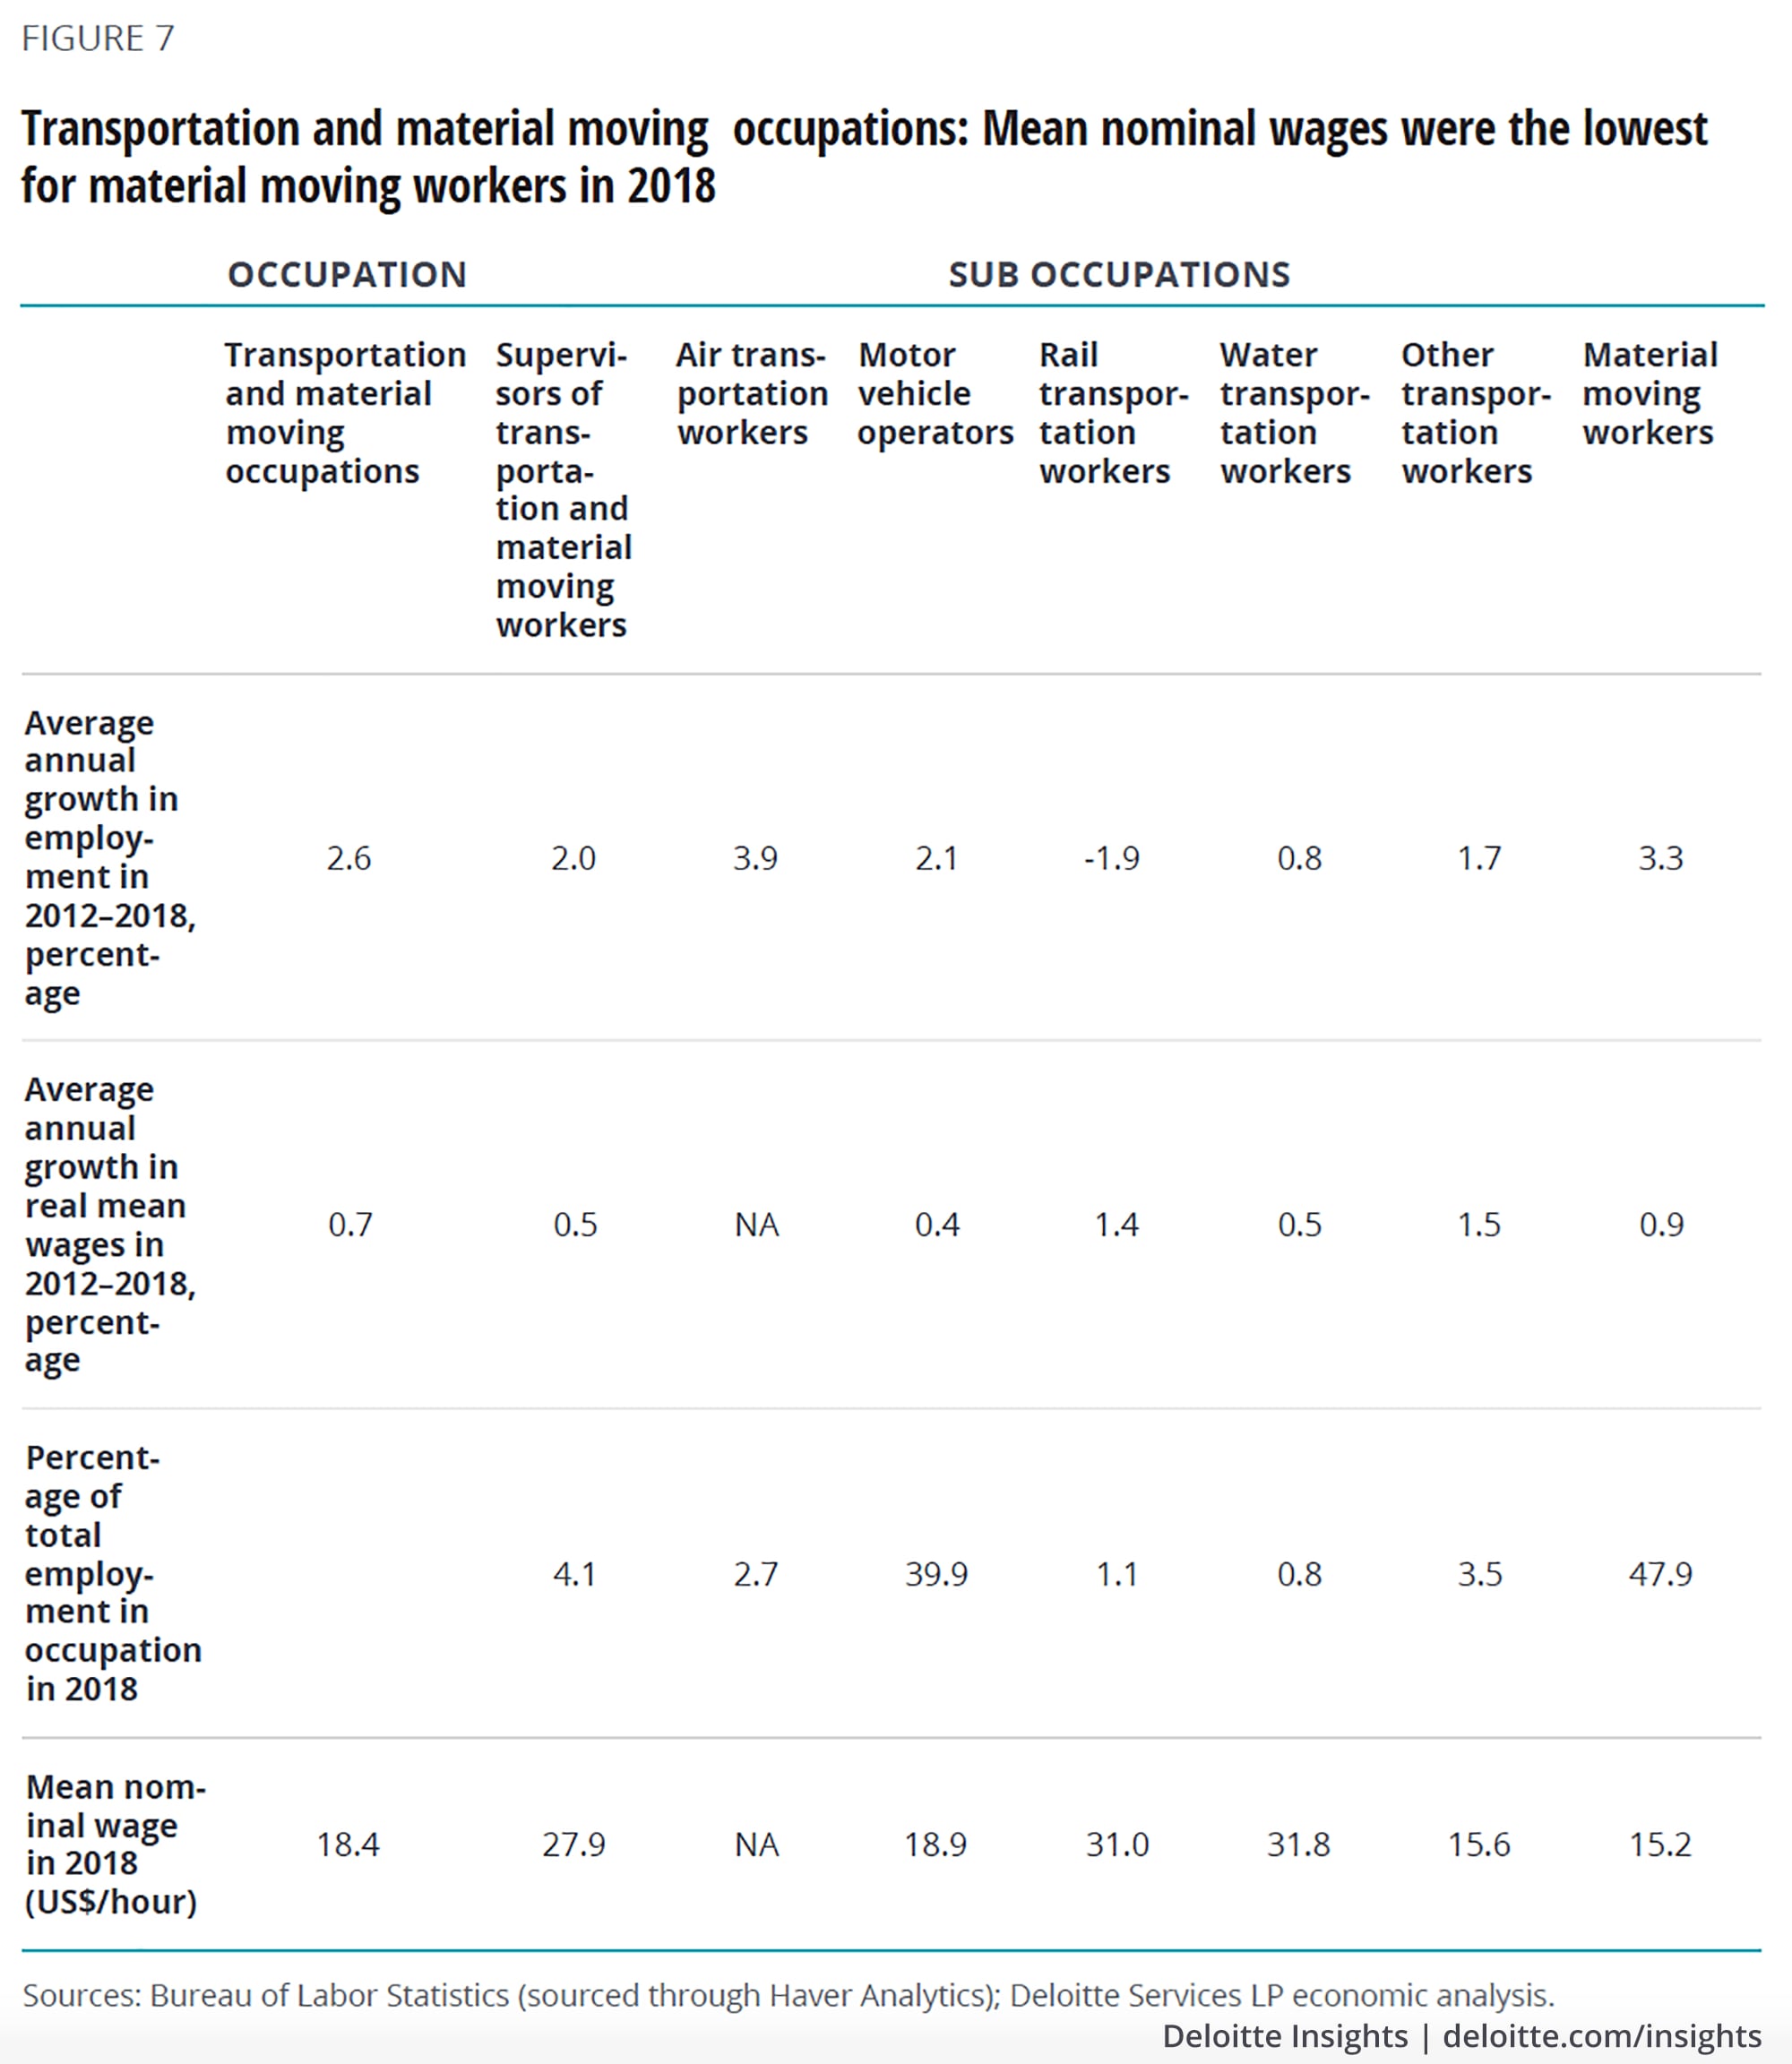 Mean nominal wages were the lowest for material moving workers in 2018